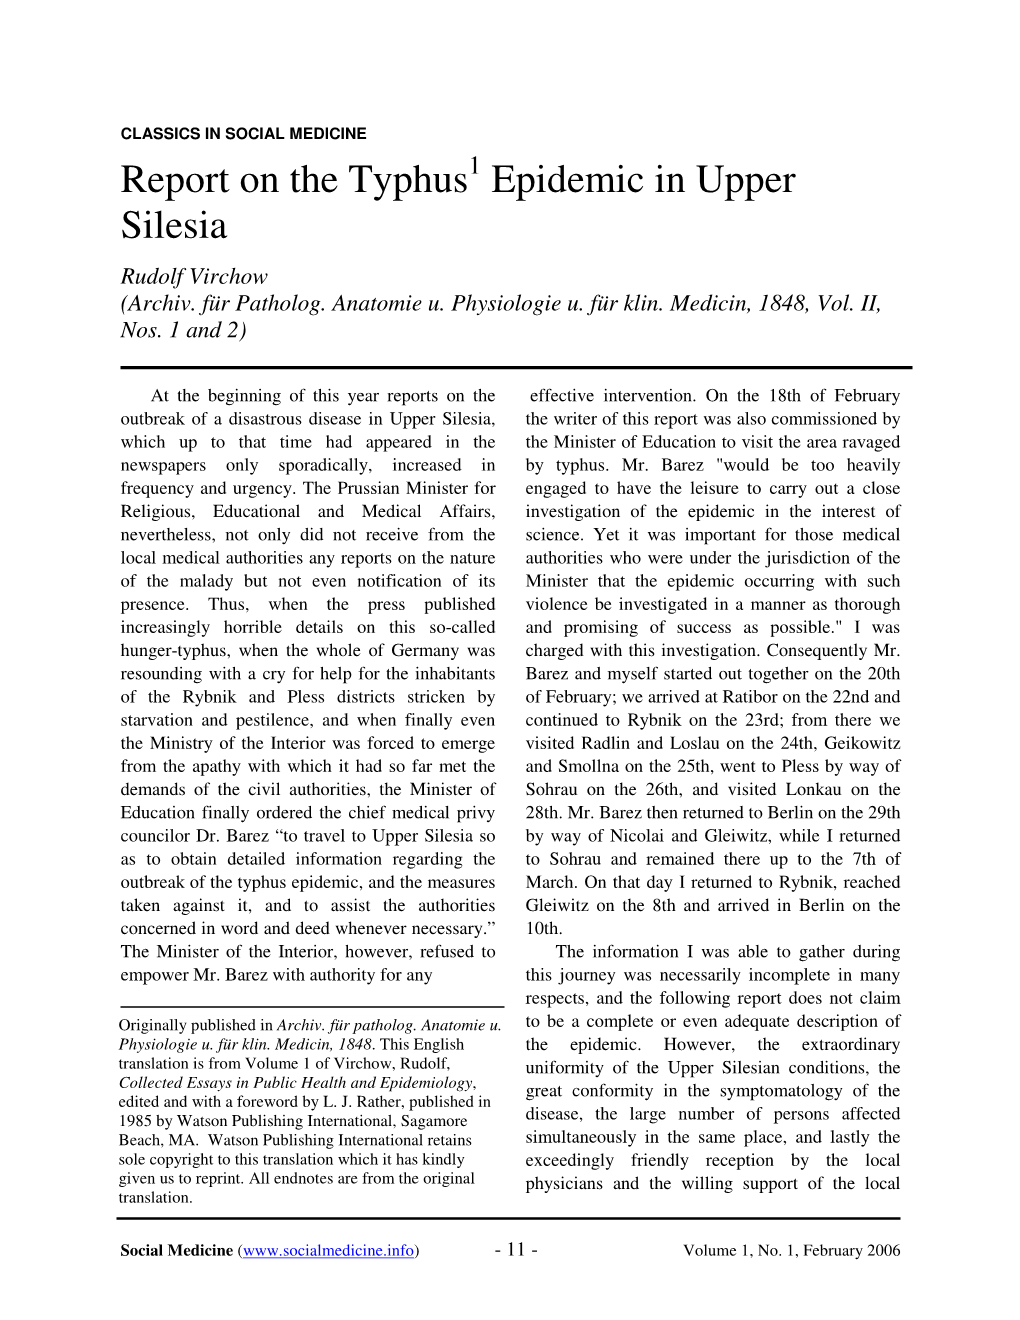 Report on the Typhus Epidemic in Upper Silesia